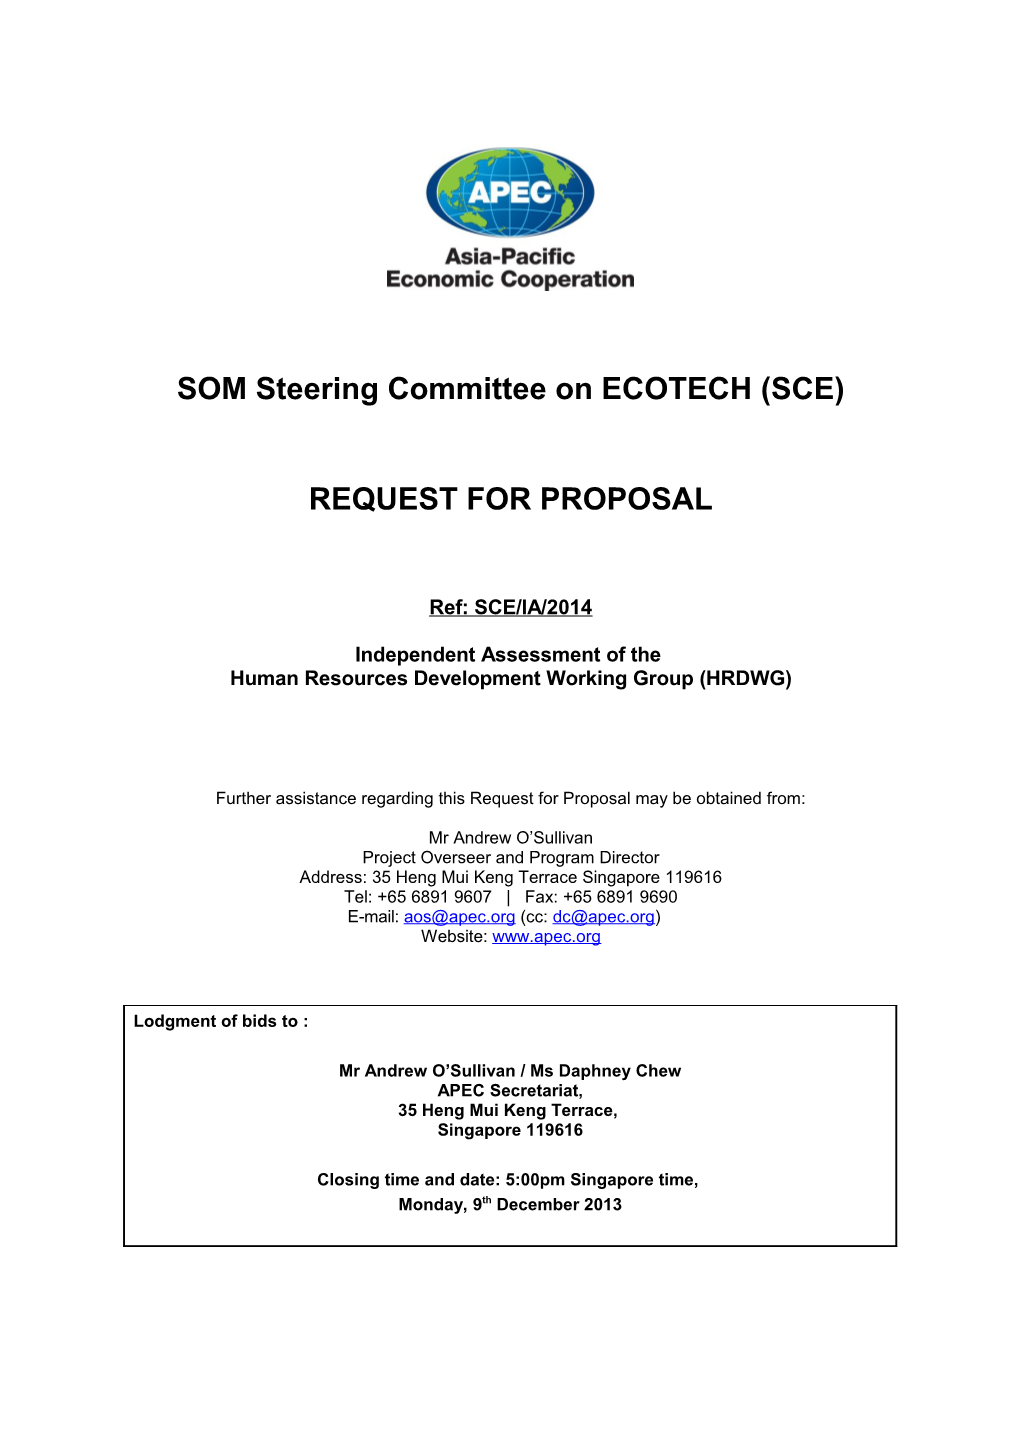 SOM Steering Committee on ECOTECH (SCE)